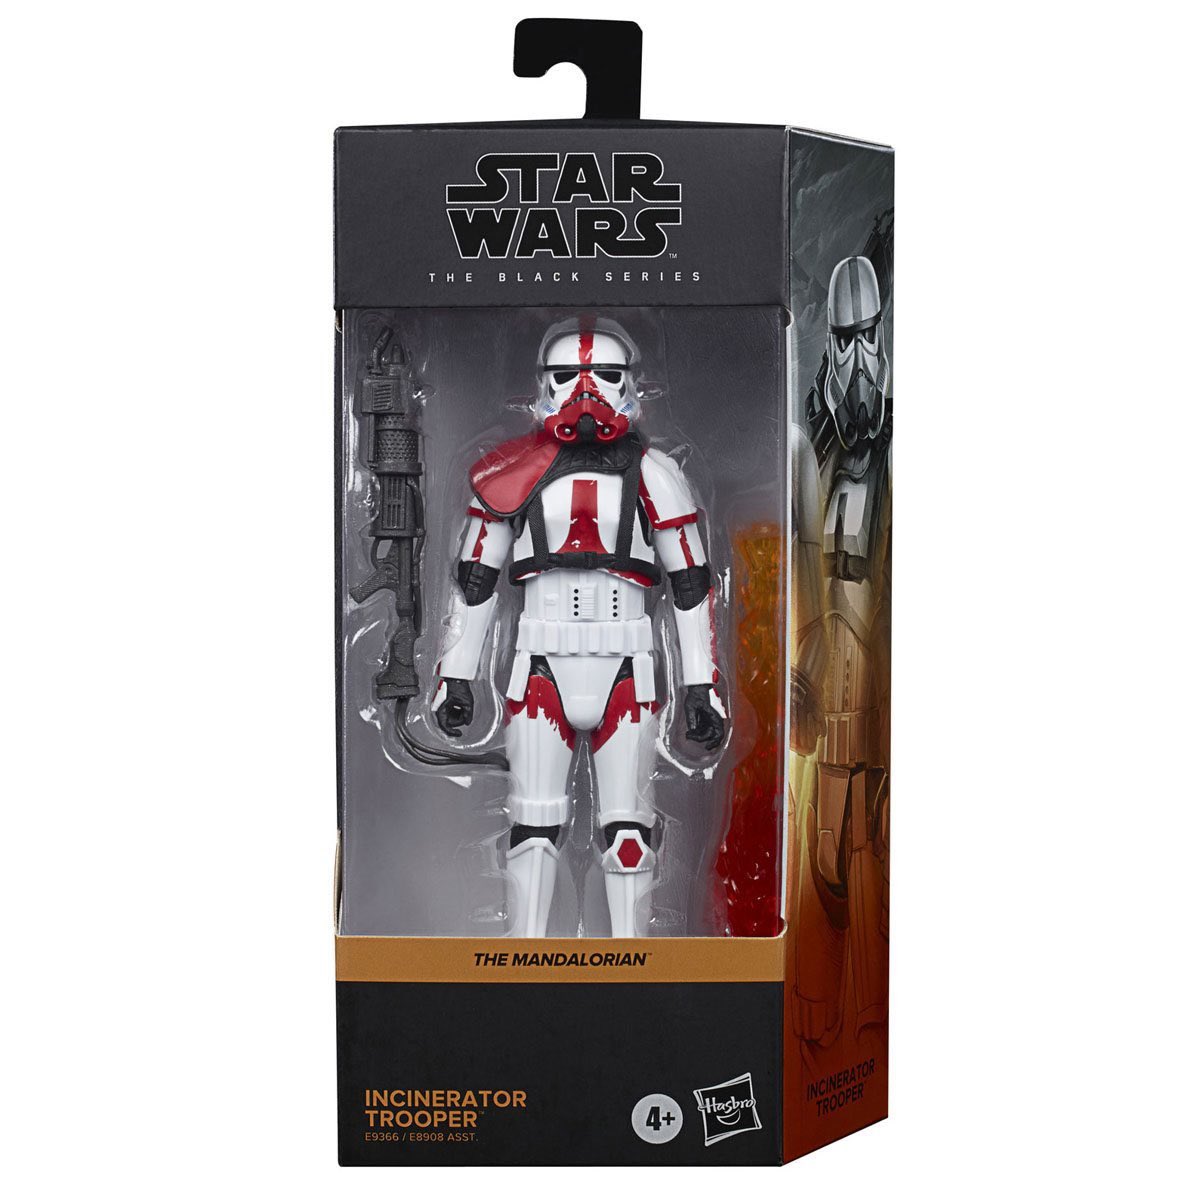 In Stock Now: The Black Series - Incinerator Trooper!

🔗 entertainmentearth.com/product/hse936…

#StarWars #TheMandalorian #StarWarsBlackSeries #IncineratorTrooper